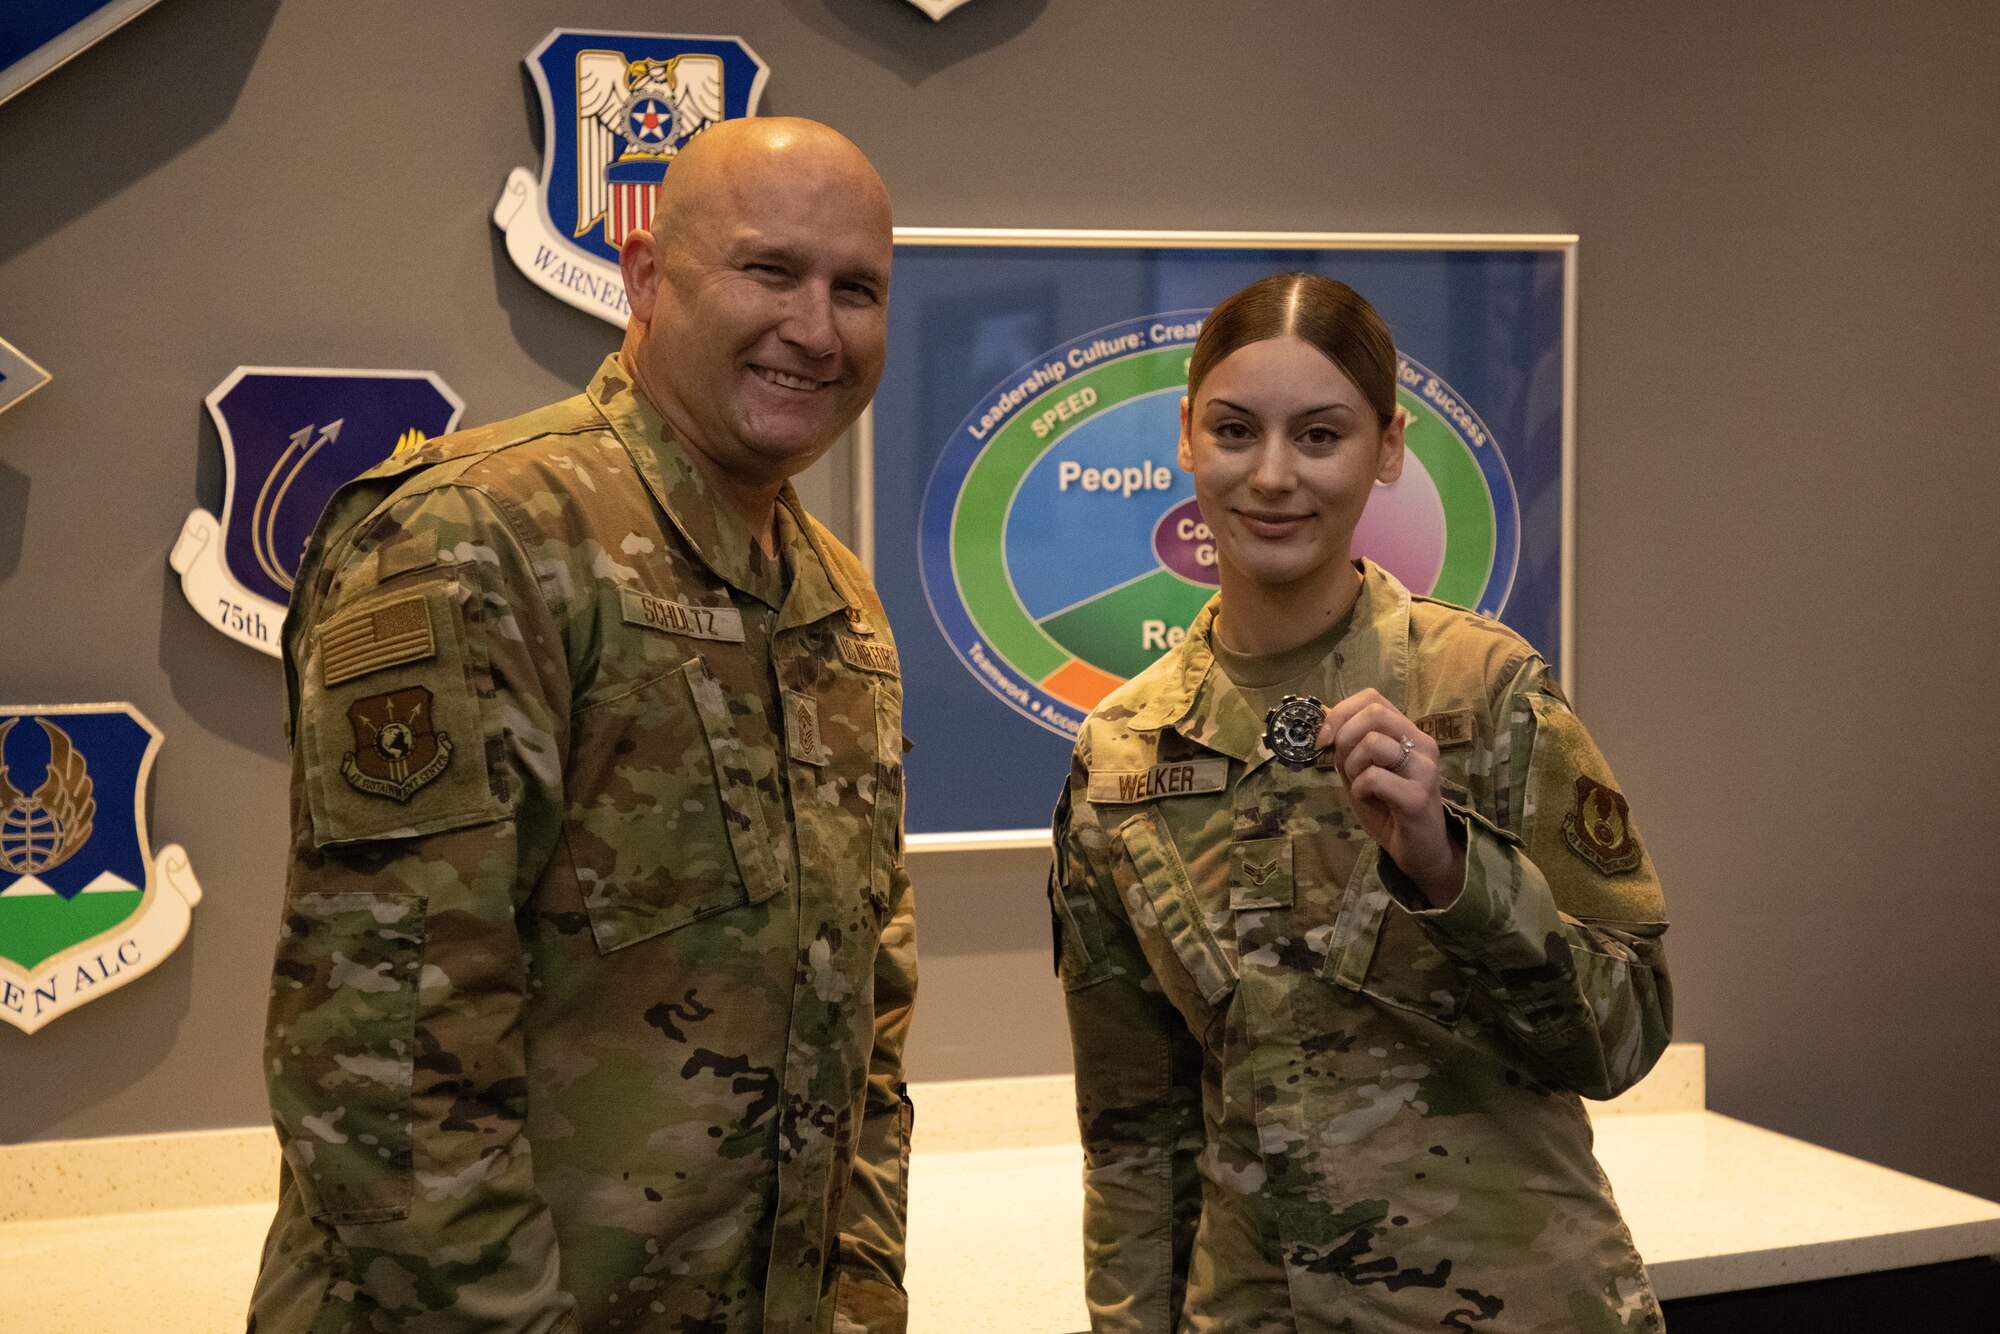 Two Airmen pose for a photo with coin